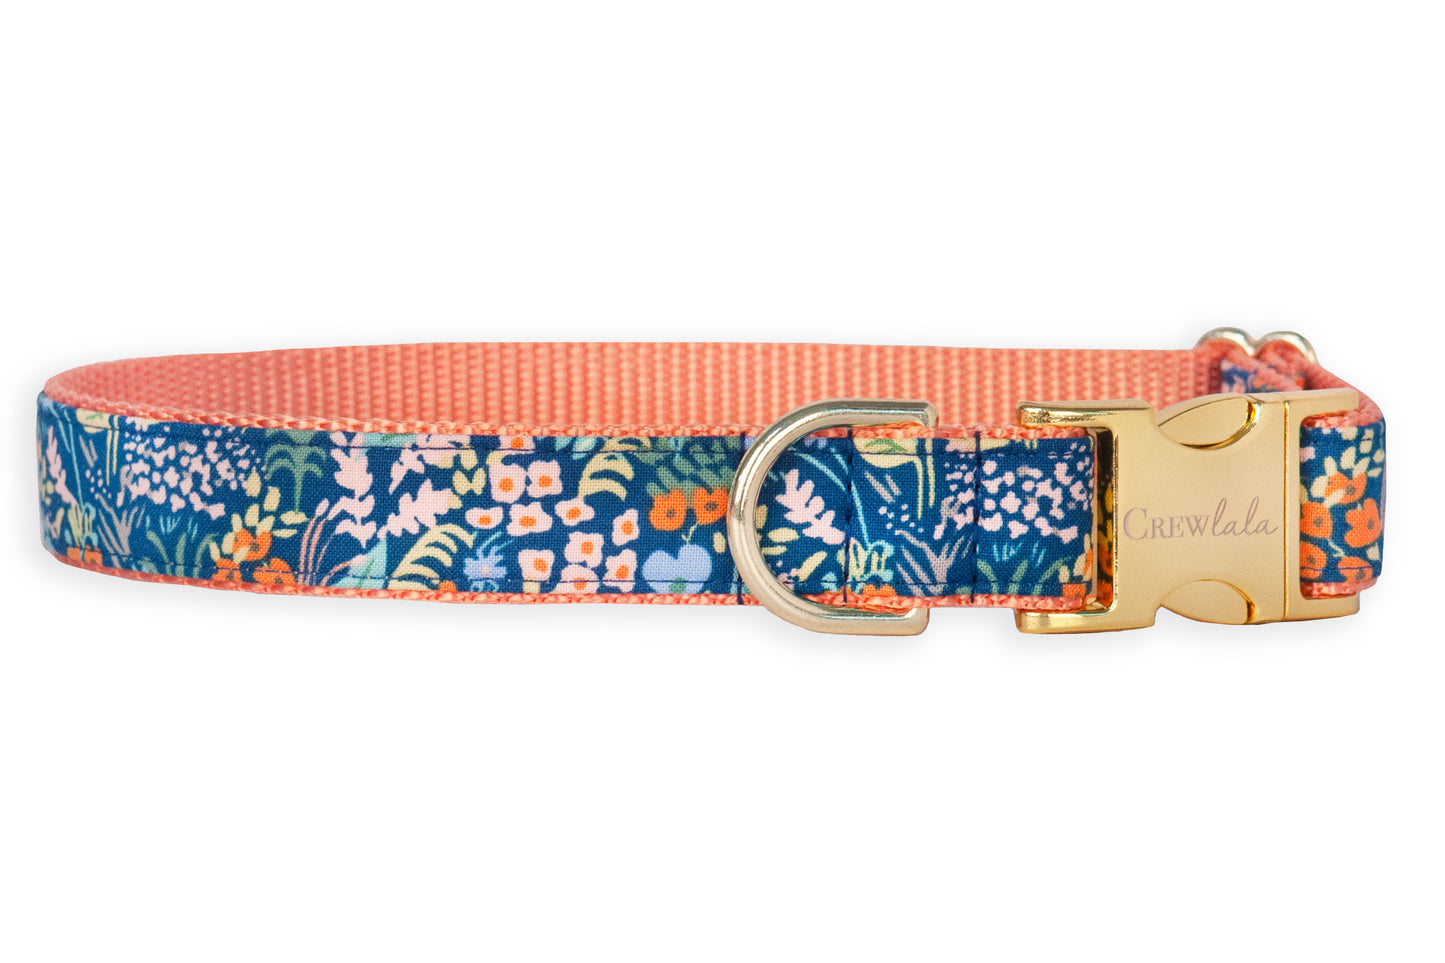 Darling Floral Bow Tie Dog Collar - Crew LaLa